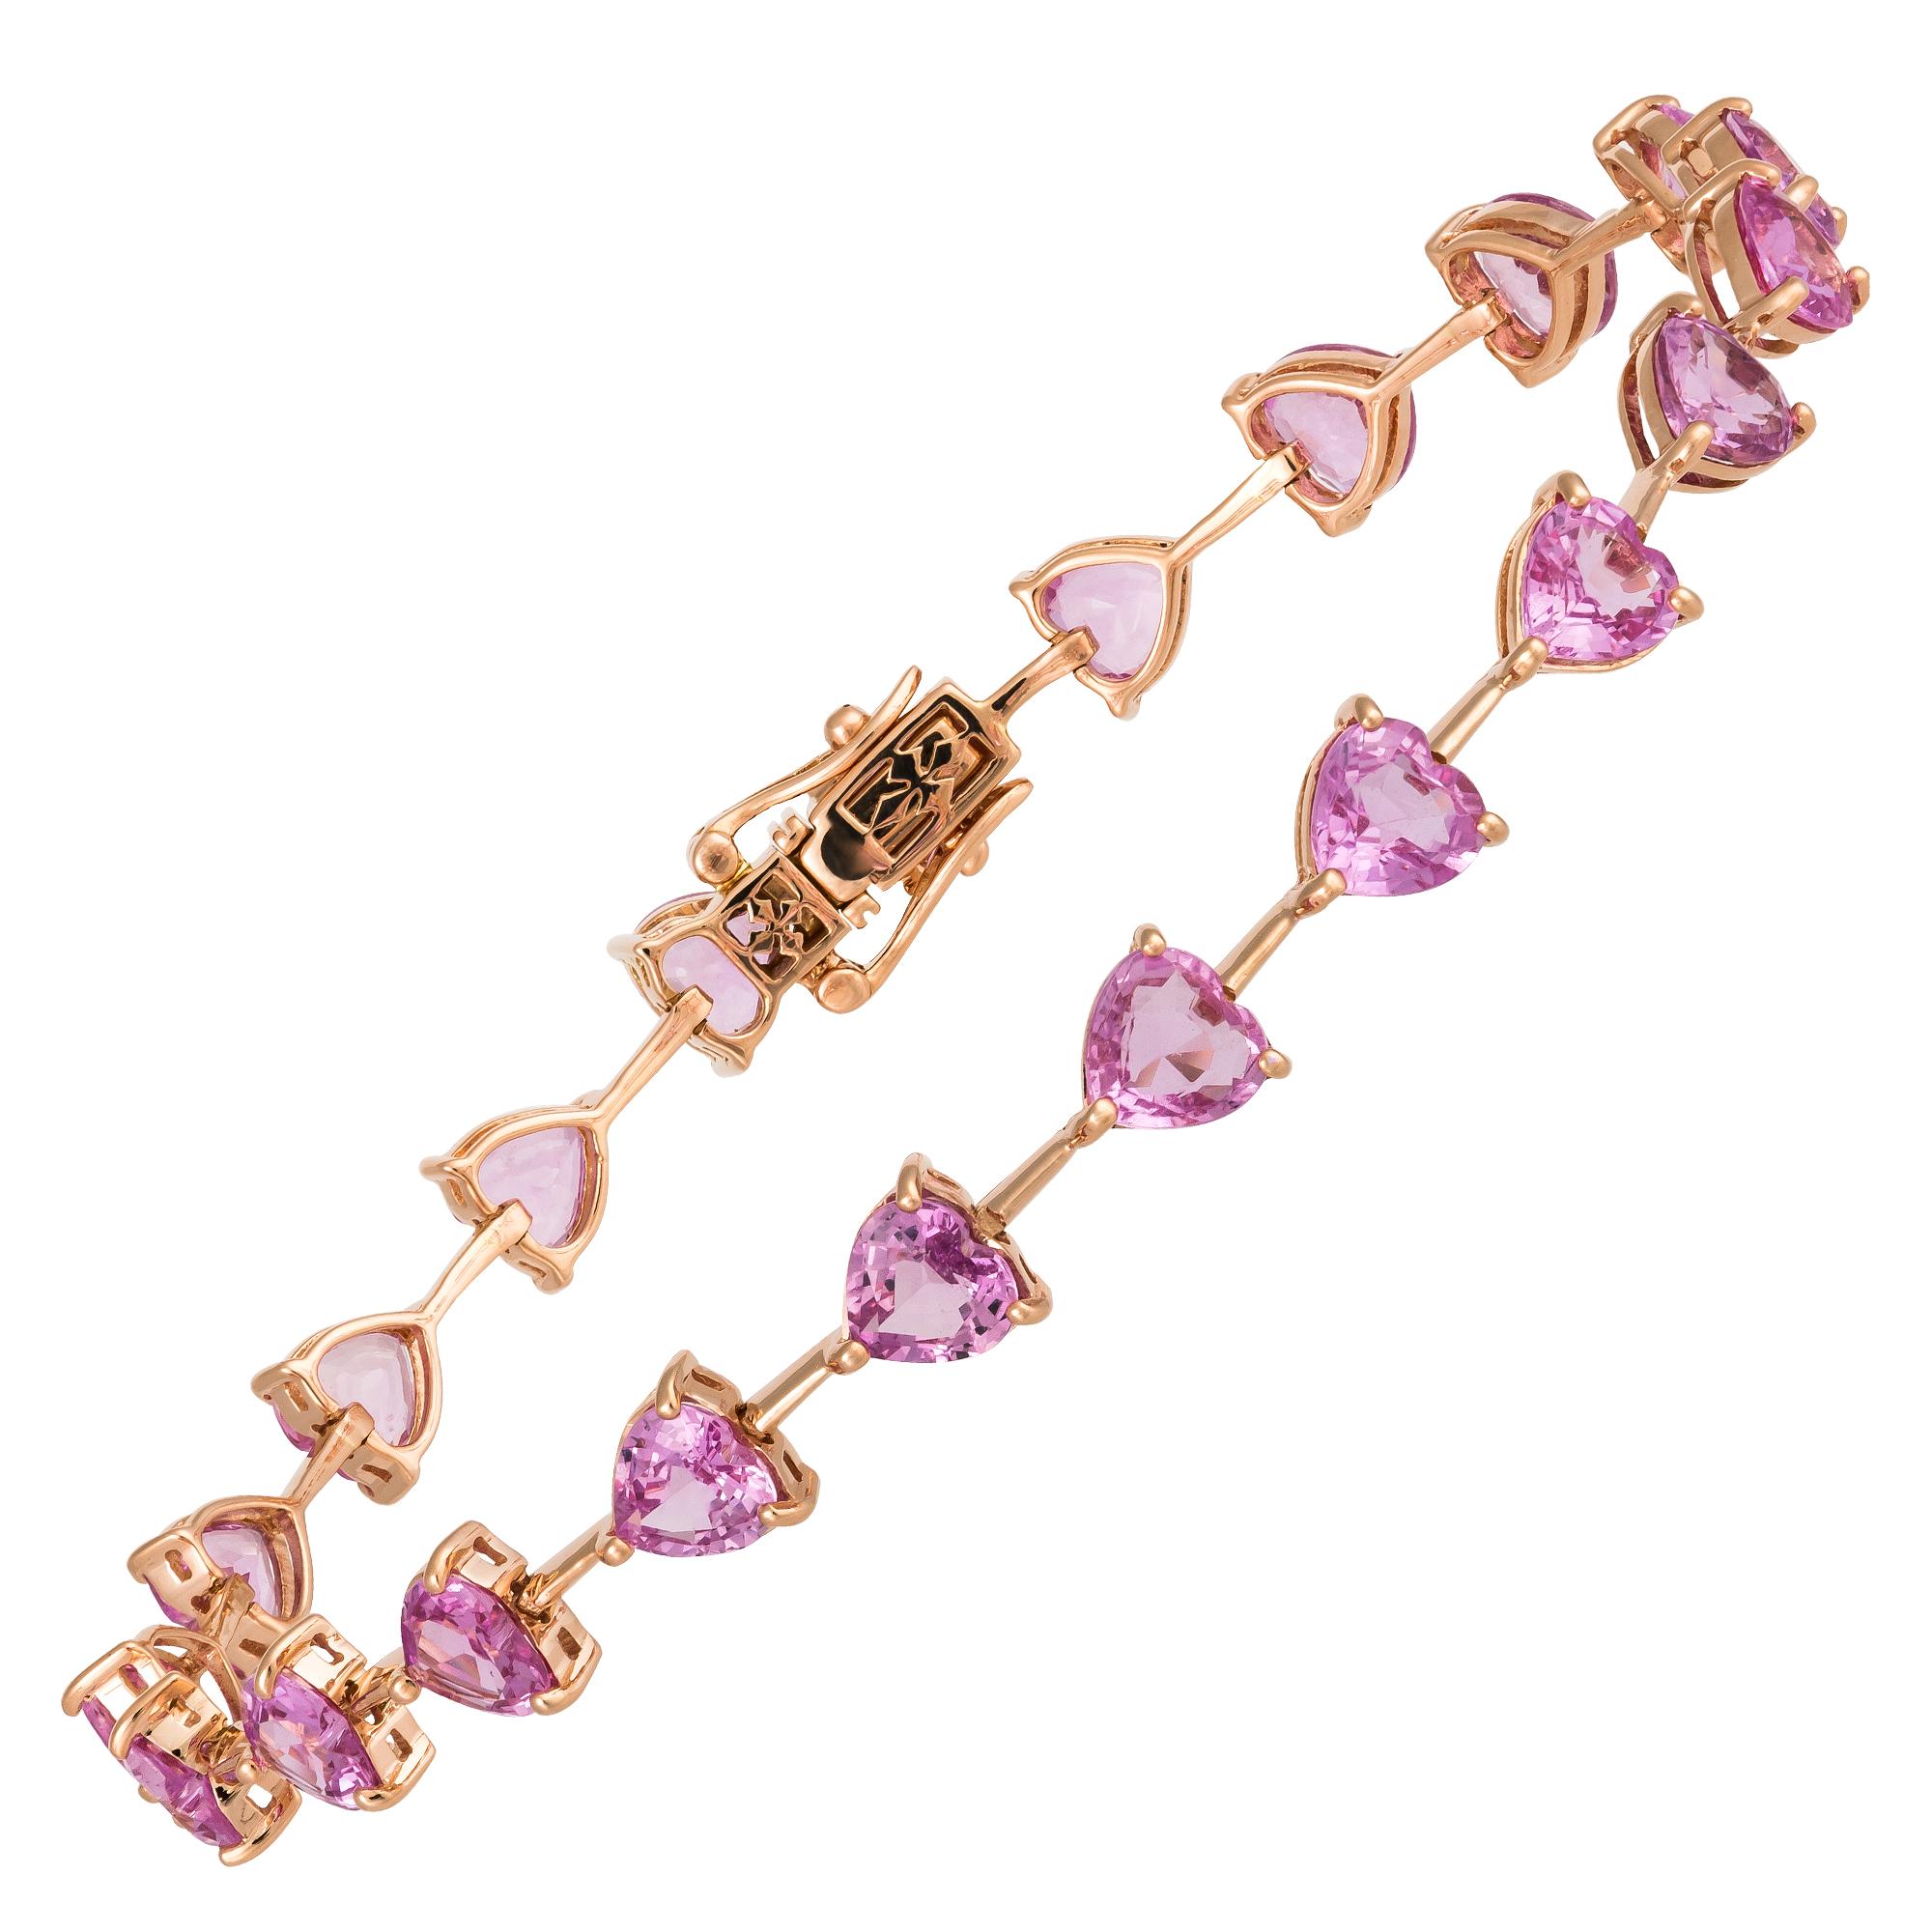 The Following Item we are offering is this Rare Important Radiant 18KT Gold Gorgeous Glittering and Sparkling Magnificent Fancy Heart Cut Pink Sapphire Bracelet. Bracelet contains approx 12CTS of Gorgeous Glittering Fancy Heart Cut Pink Sapphires!!!